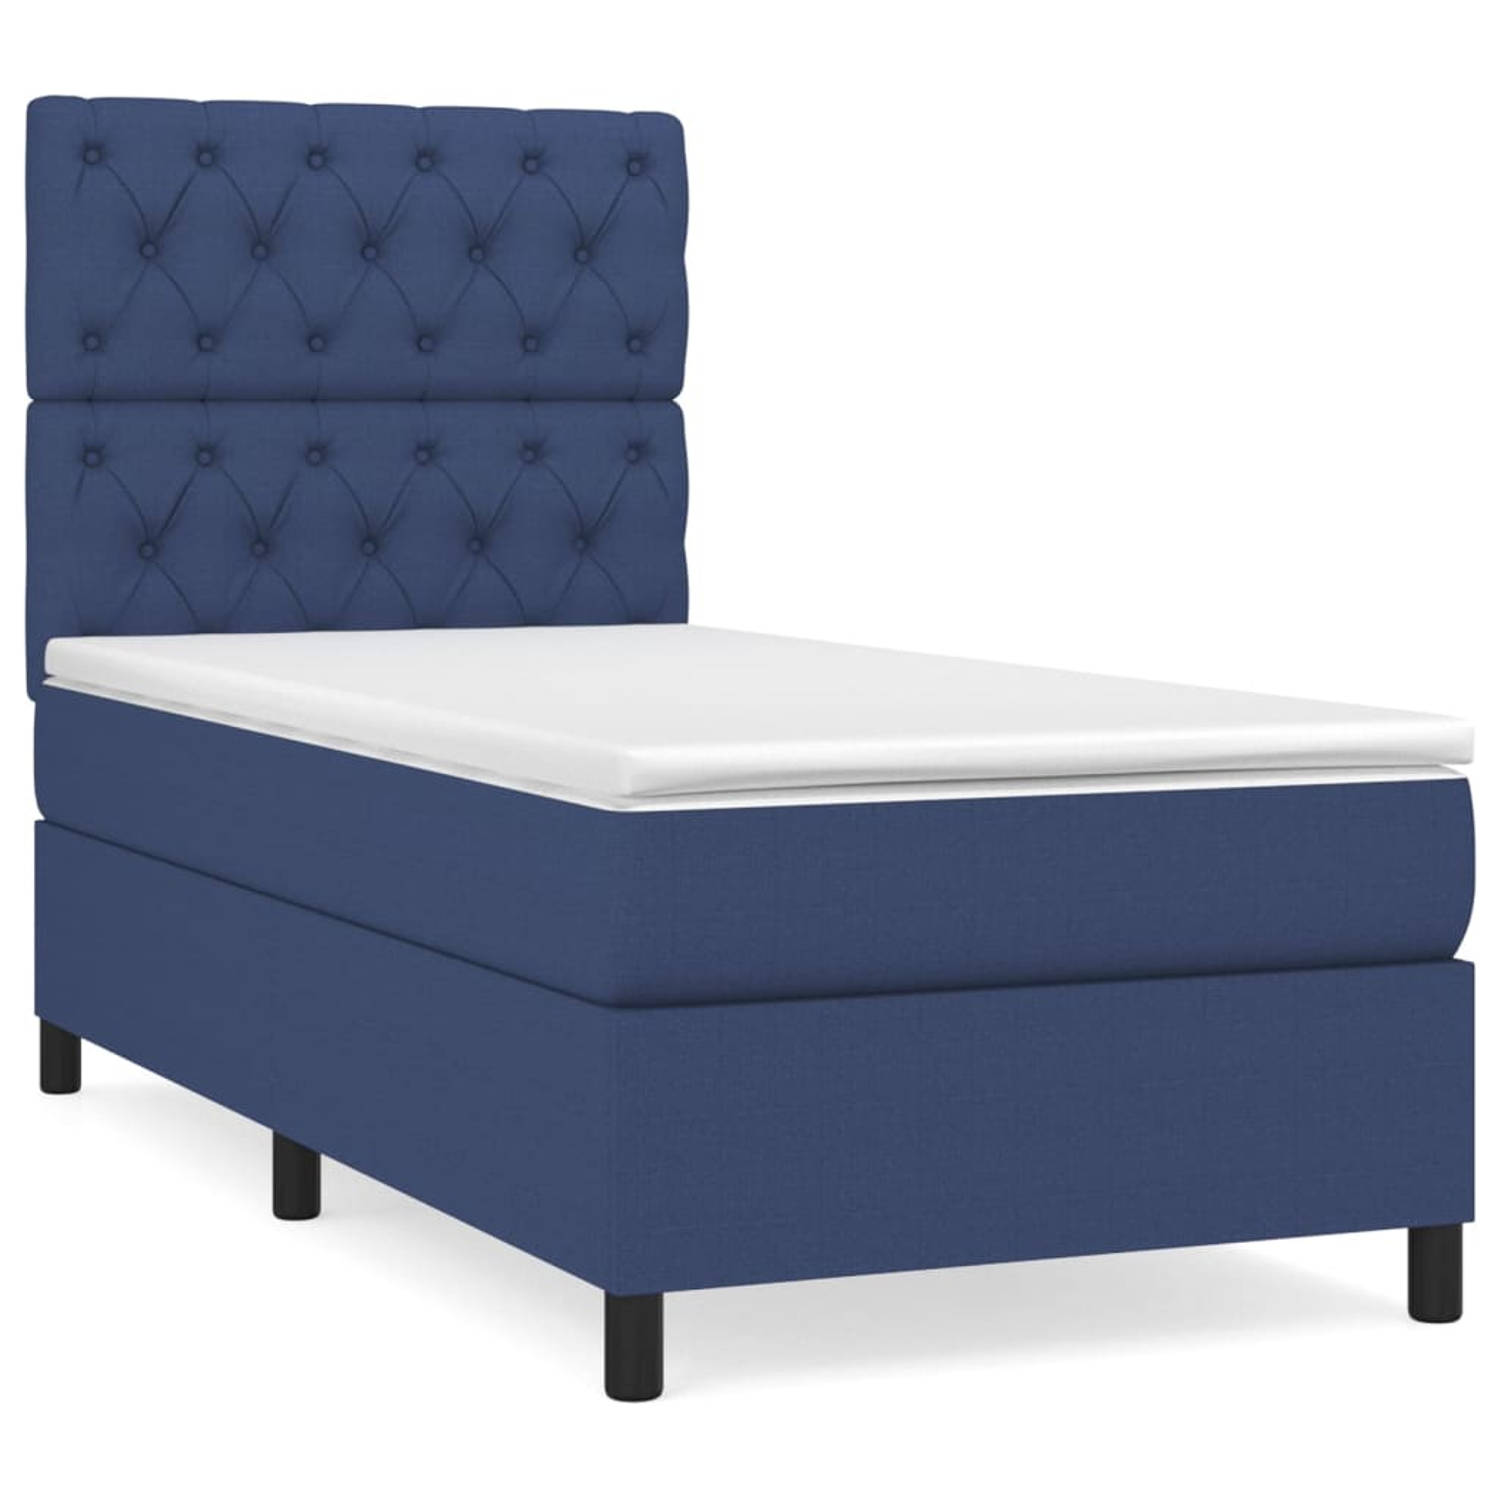 The Living Store Boxspringbed - Comfort - Bed - 203 x 83 x 118/128 cm - Blauw - Stof (100% polyester)